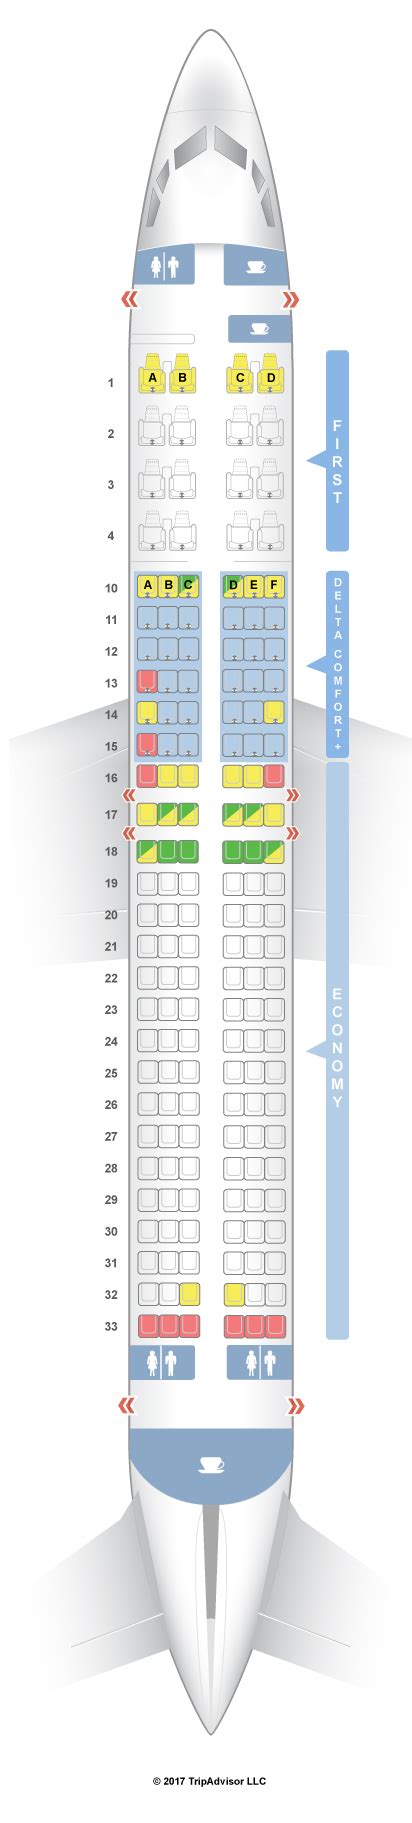 Delta Airlines Boeing Seating Chart Hot Sex Picture